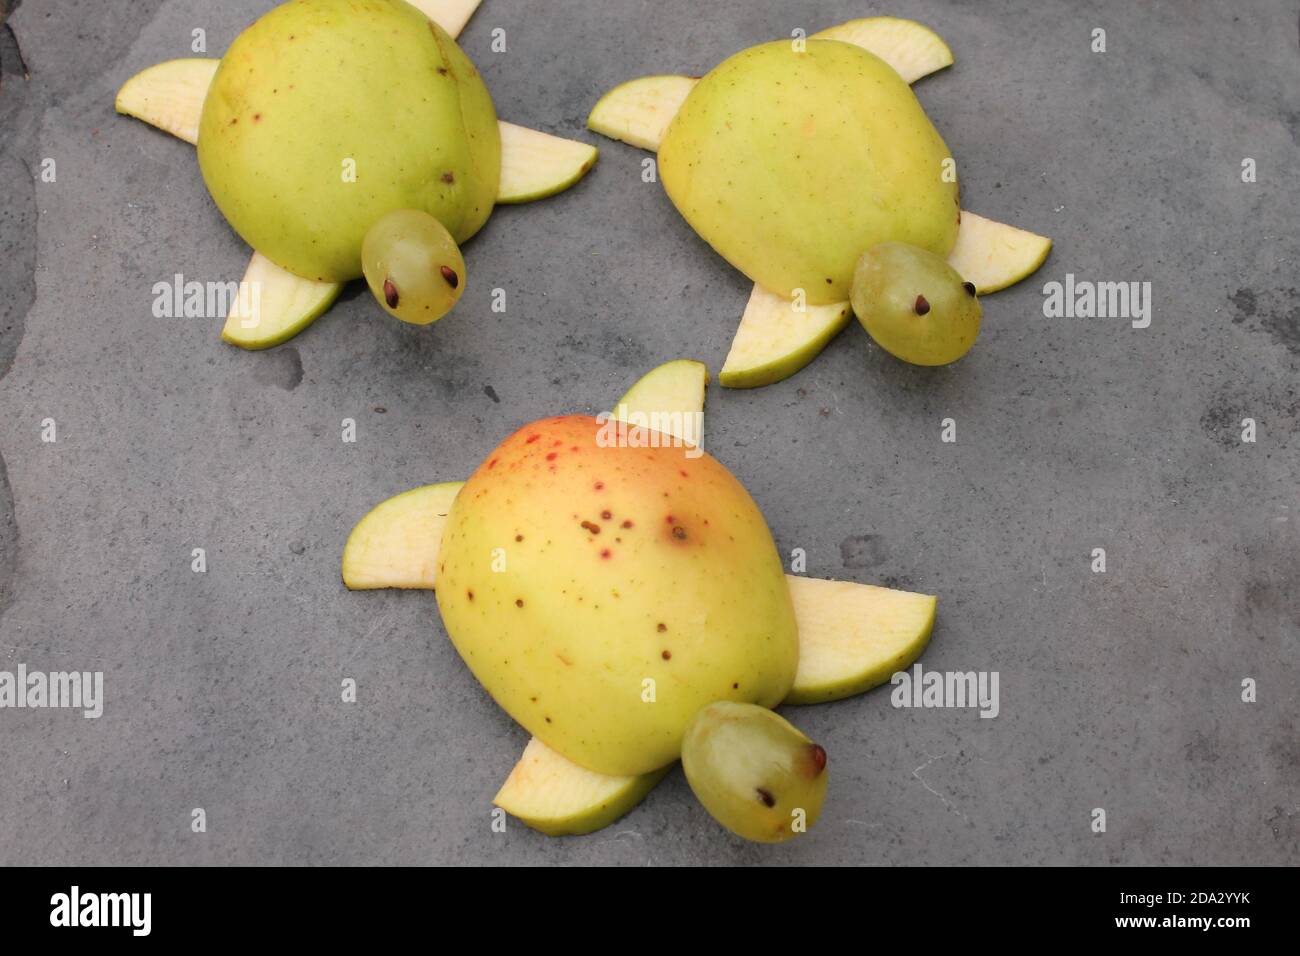 Carved apples and grapes to look like tortoise, healthy snacks for kids Stock Photo